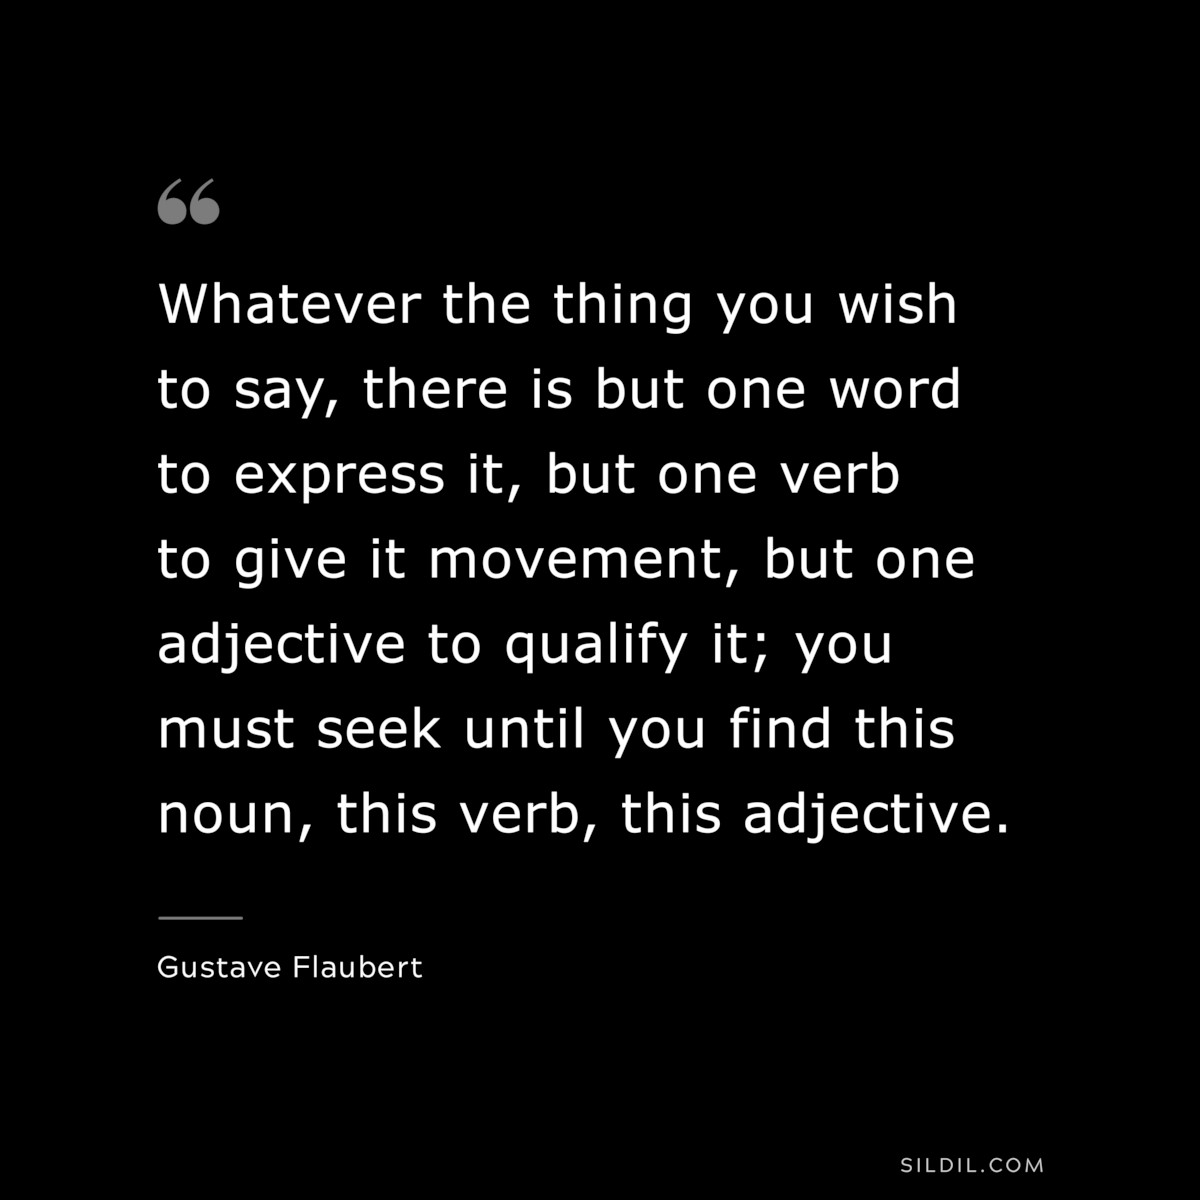 Whatever the thing you wish to say, there is but one word to express it, but one verb to give it movement, but one adjective to qualify it; you must seek until you find this noun, this verb, this adjective. ― Gustave Flaubert